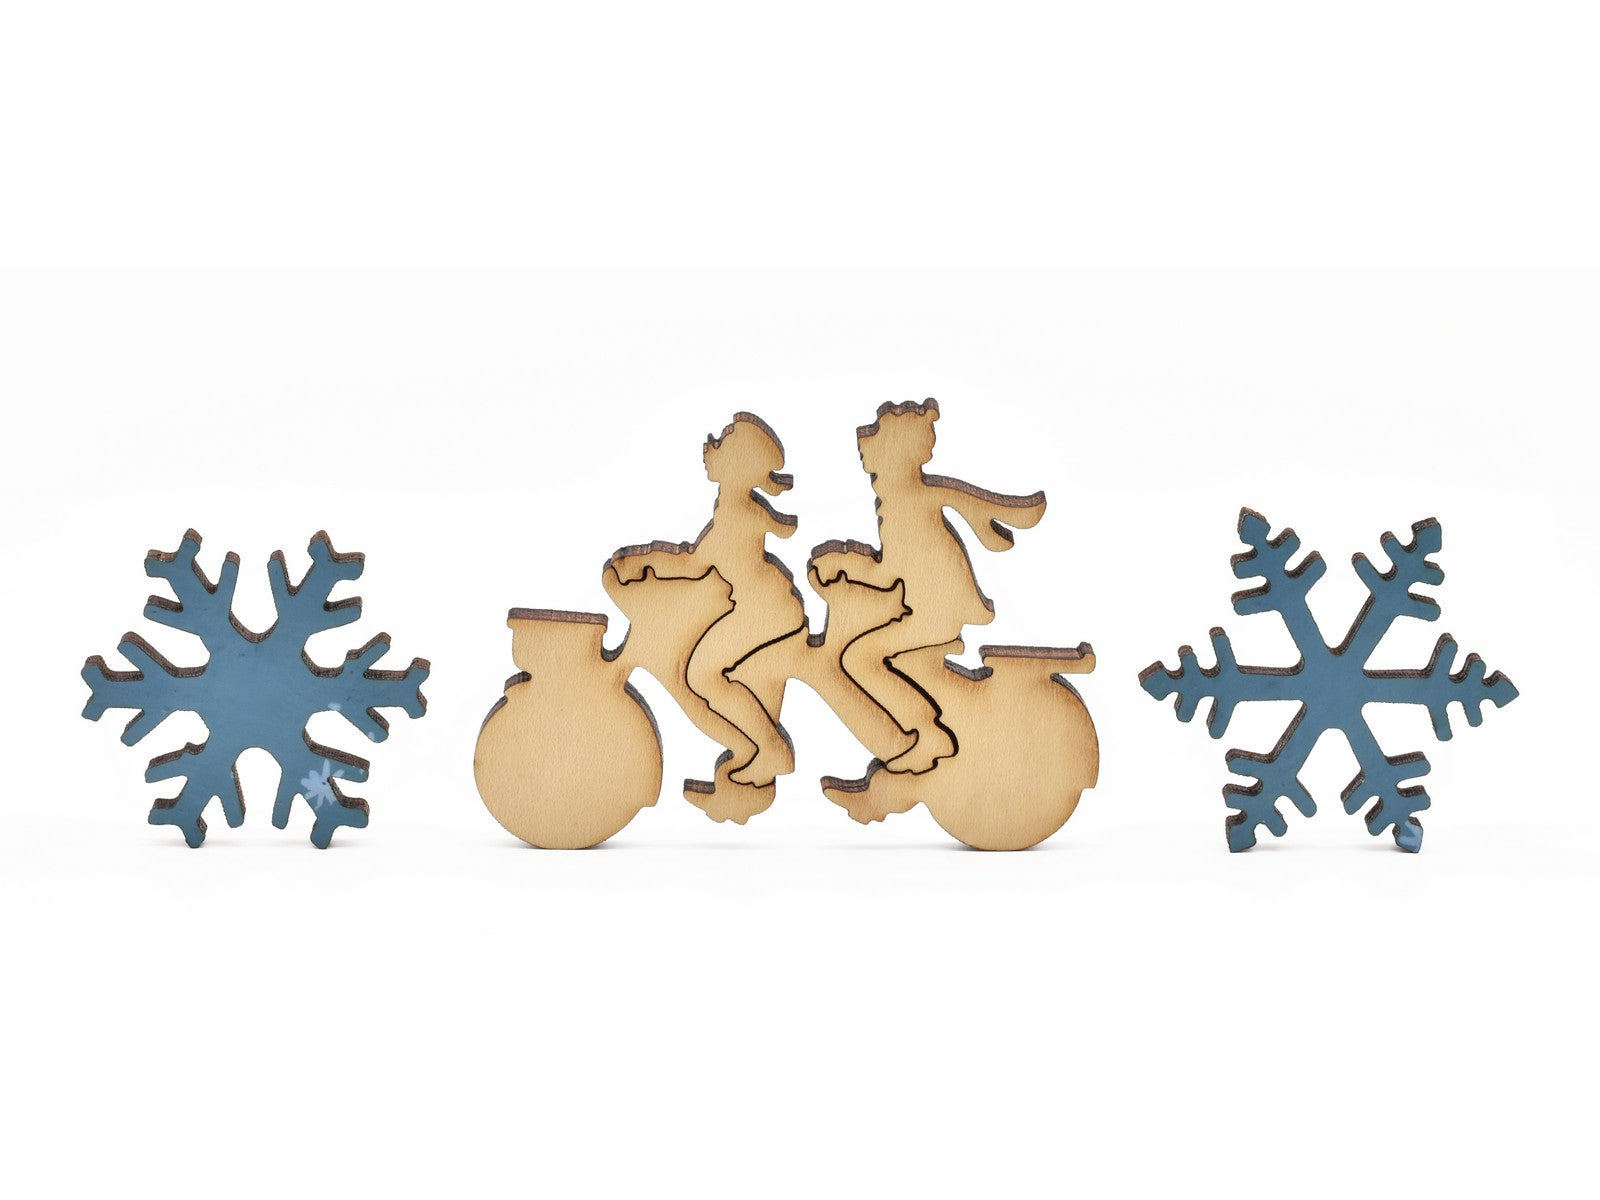 A closeup of pieces in the shape of snowflakes and people riding a tandem bike.